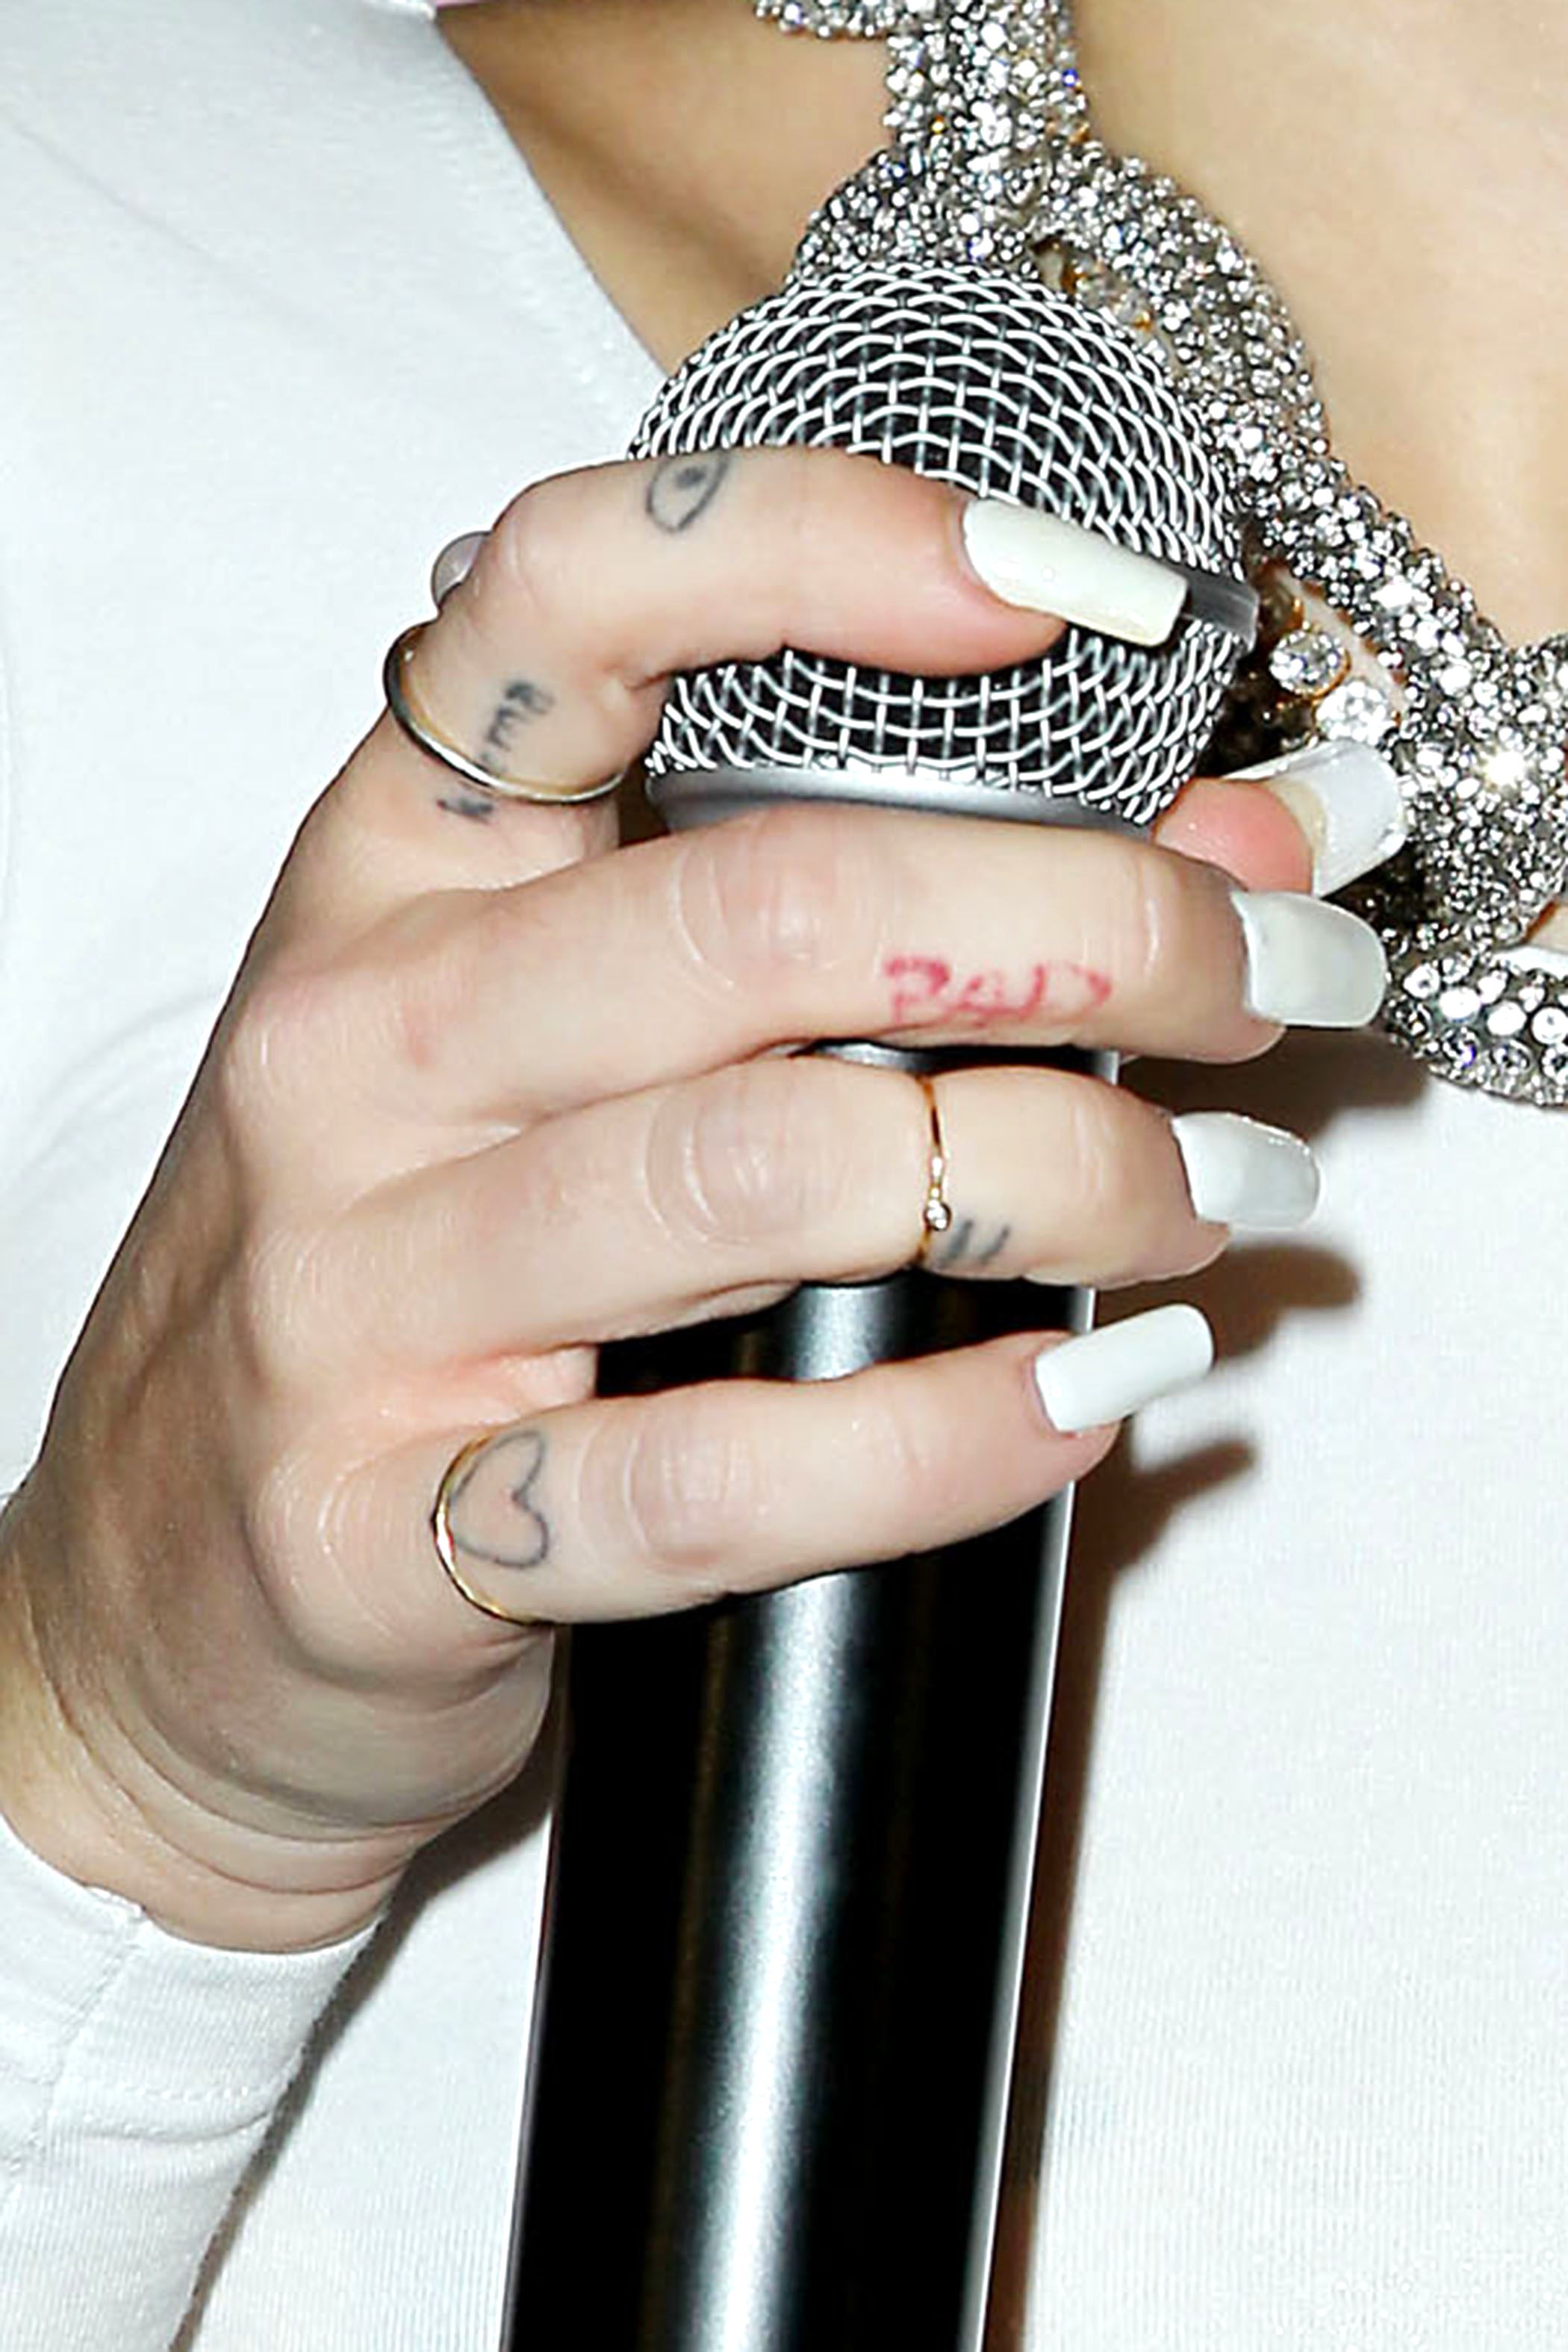 How Many Tattoos Does Miley Cyrus Have? Photos of Her 70 Ink Designs and Meanings